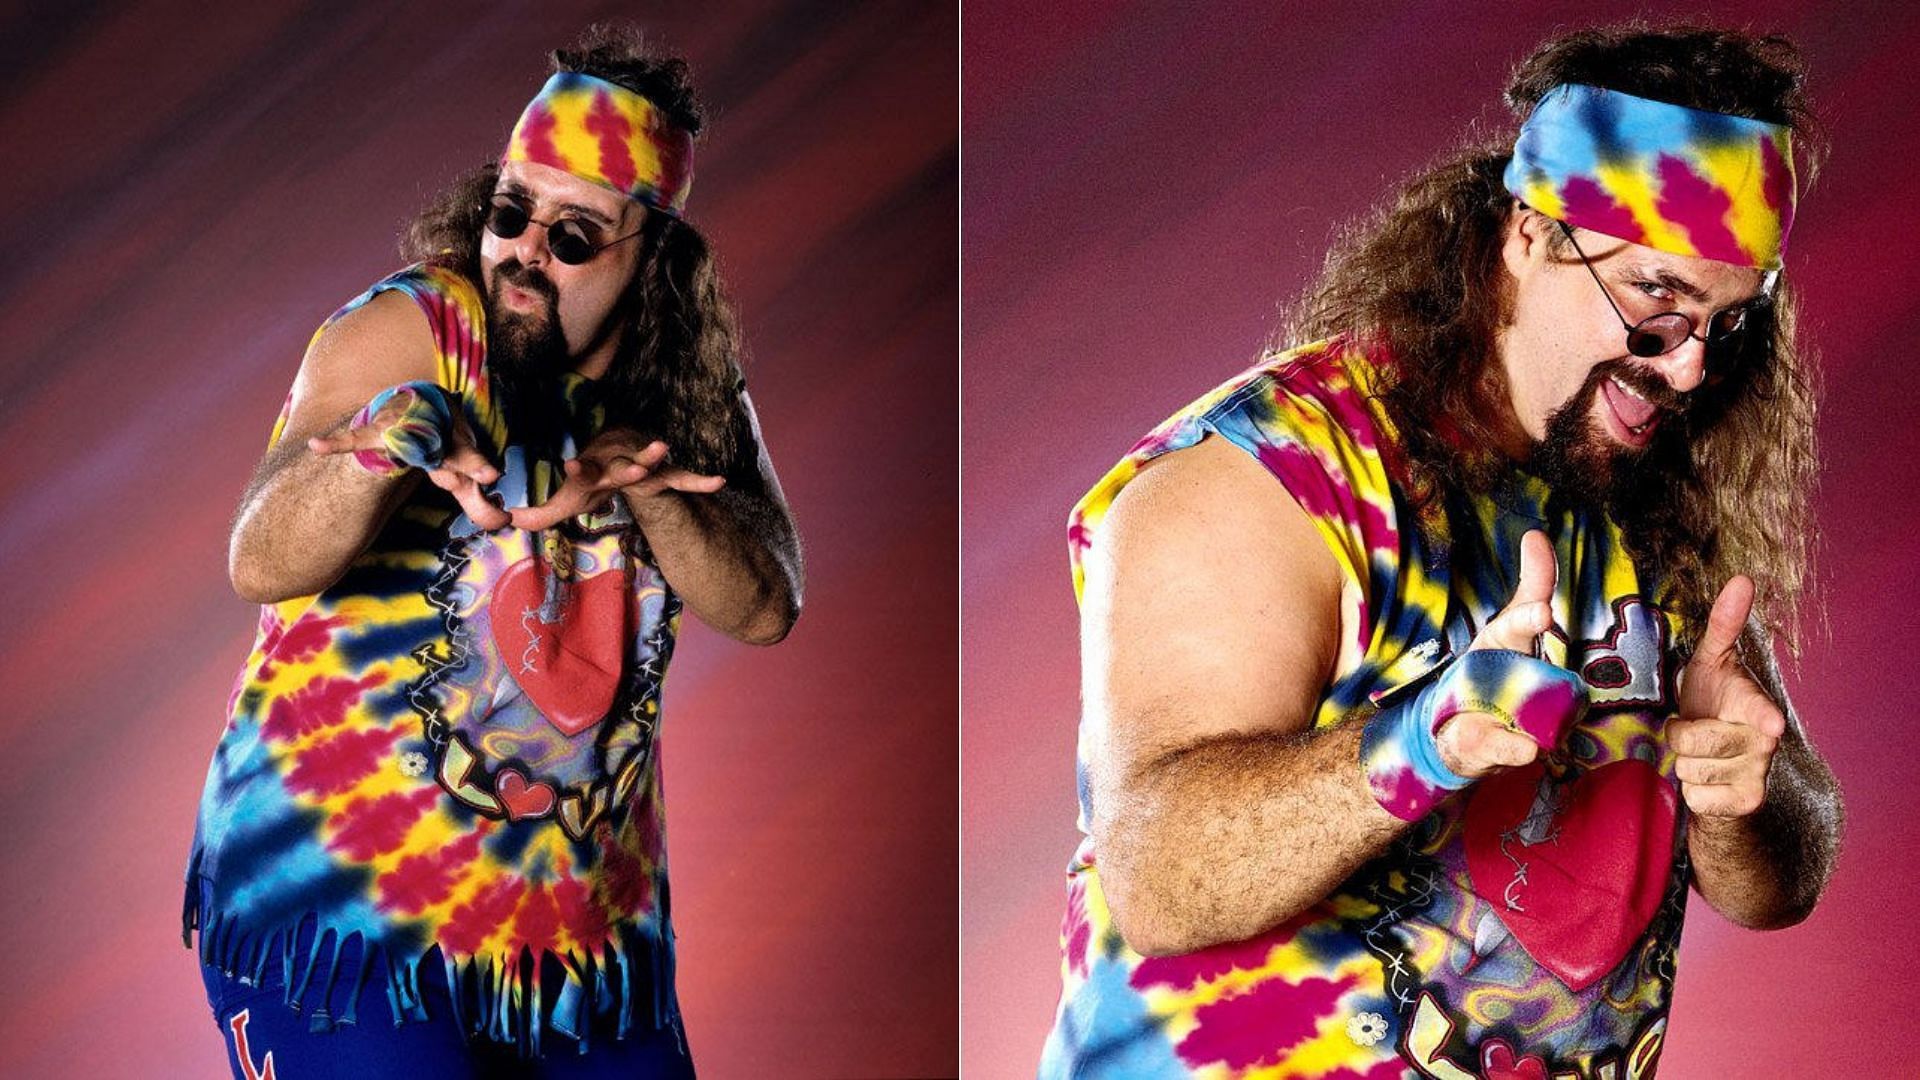 Mick Foley performed as his Dude Love alter-ego in 1997 and 1998